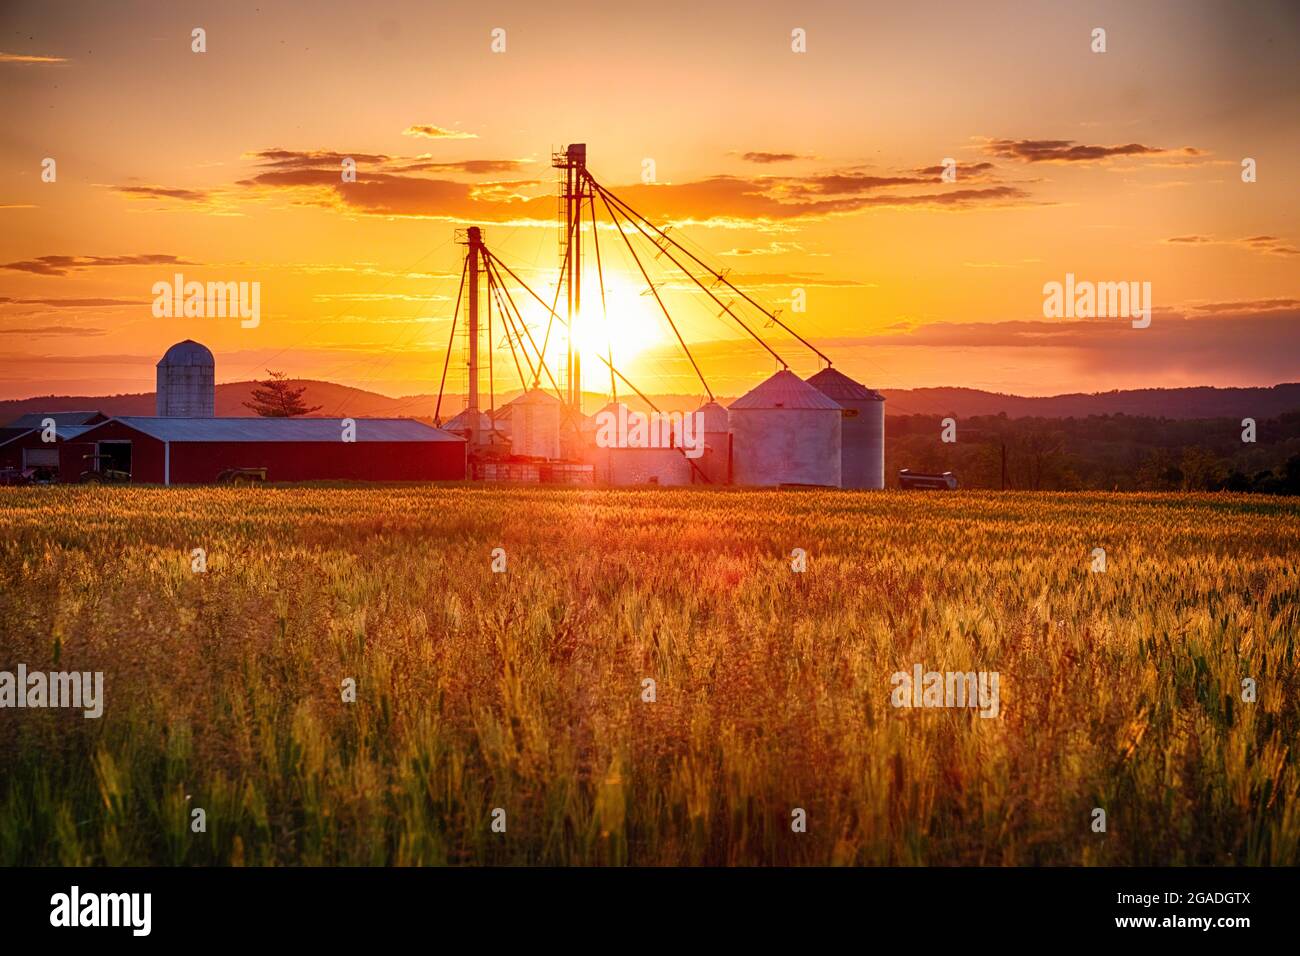 American Farm with Grain Silos whith a Wheat Filed at Sunset, Frenchtown, Hunterdon County, New Jersey Stock Photo